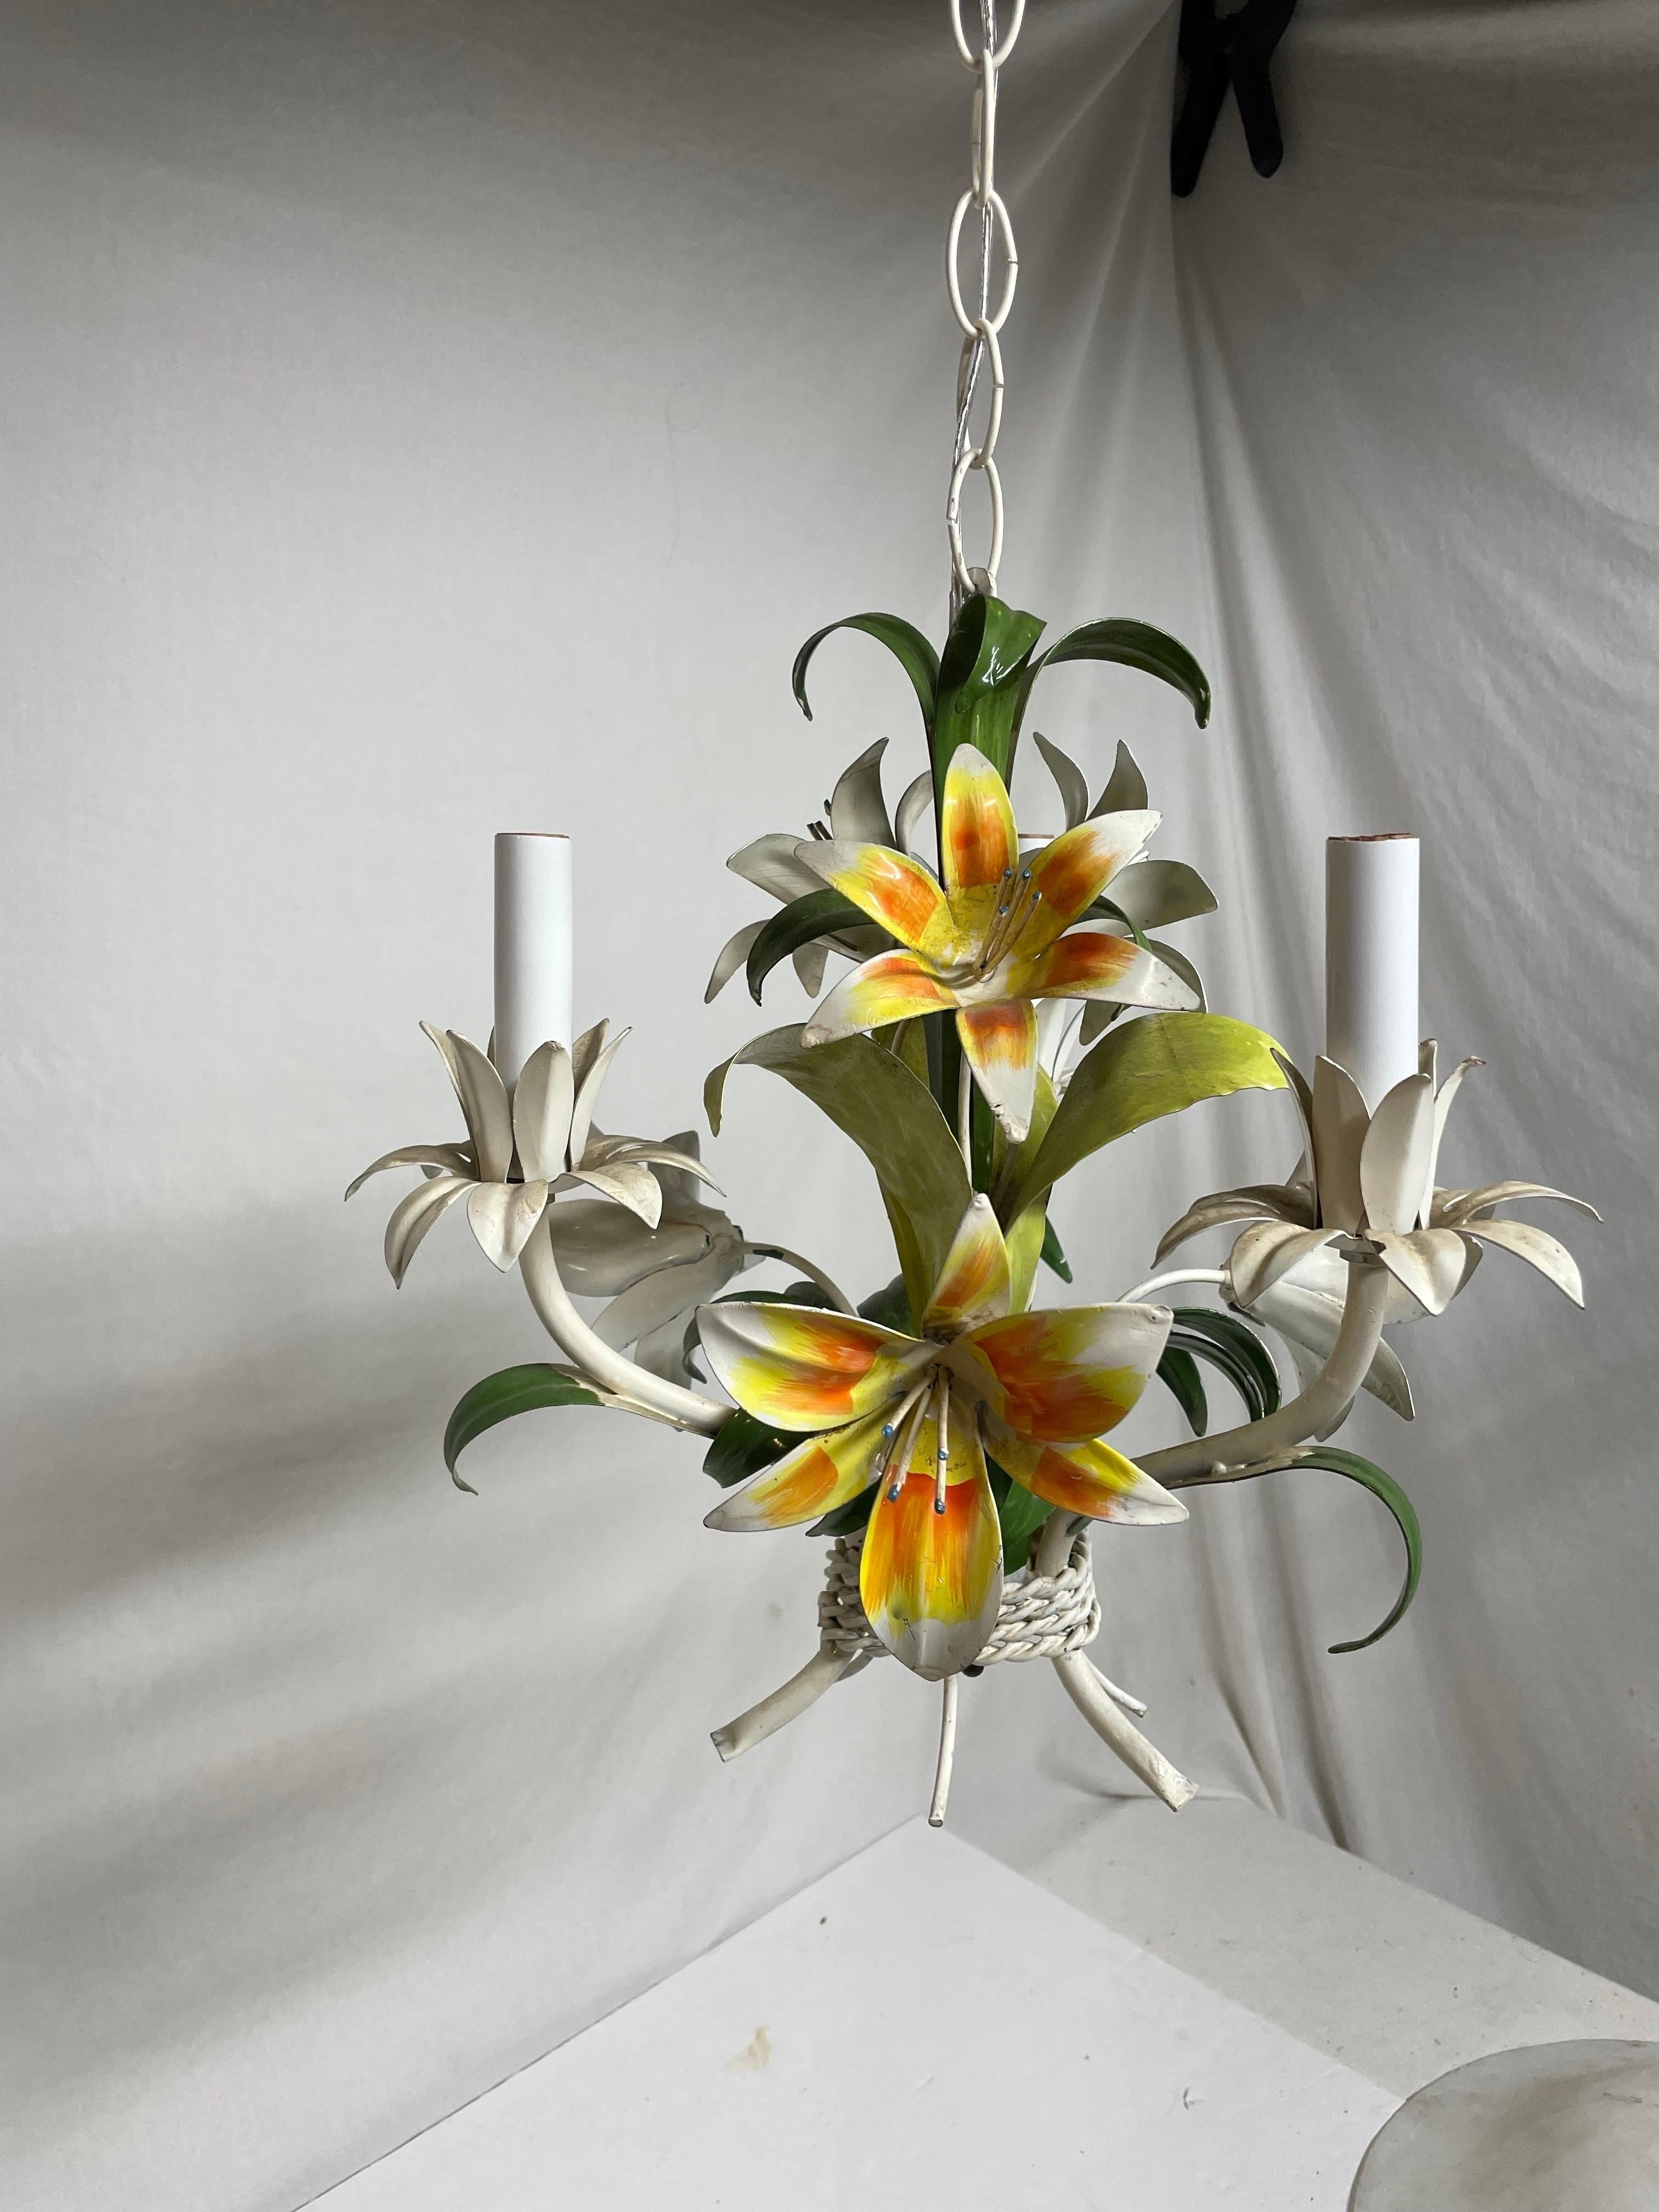  Italian floral tole three arm chandelier.  Lilly flowers in yellows, orange, pink, greens and cream. Some chipping paint that adds to the character. Rewired. and in good working condition. Measures: 13